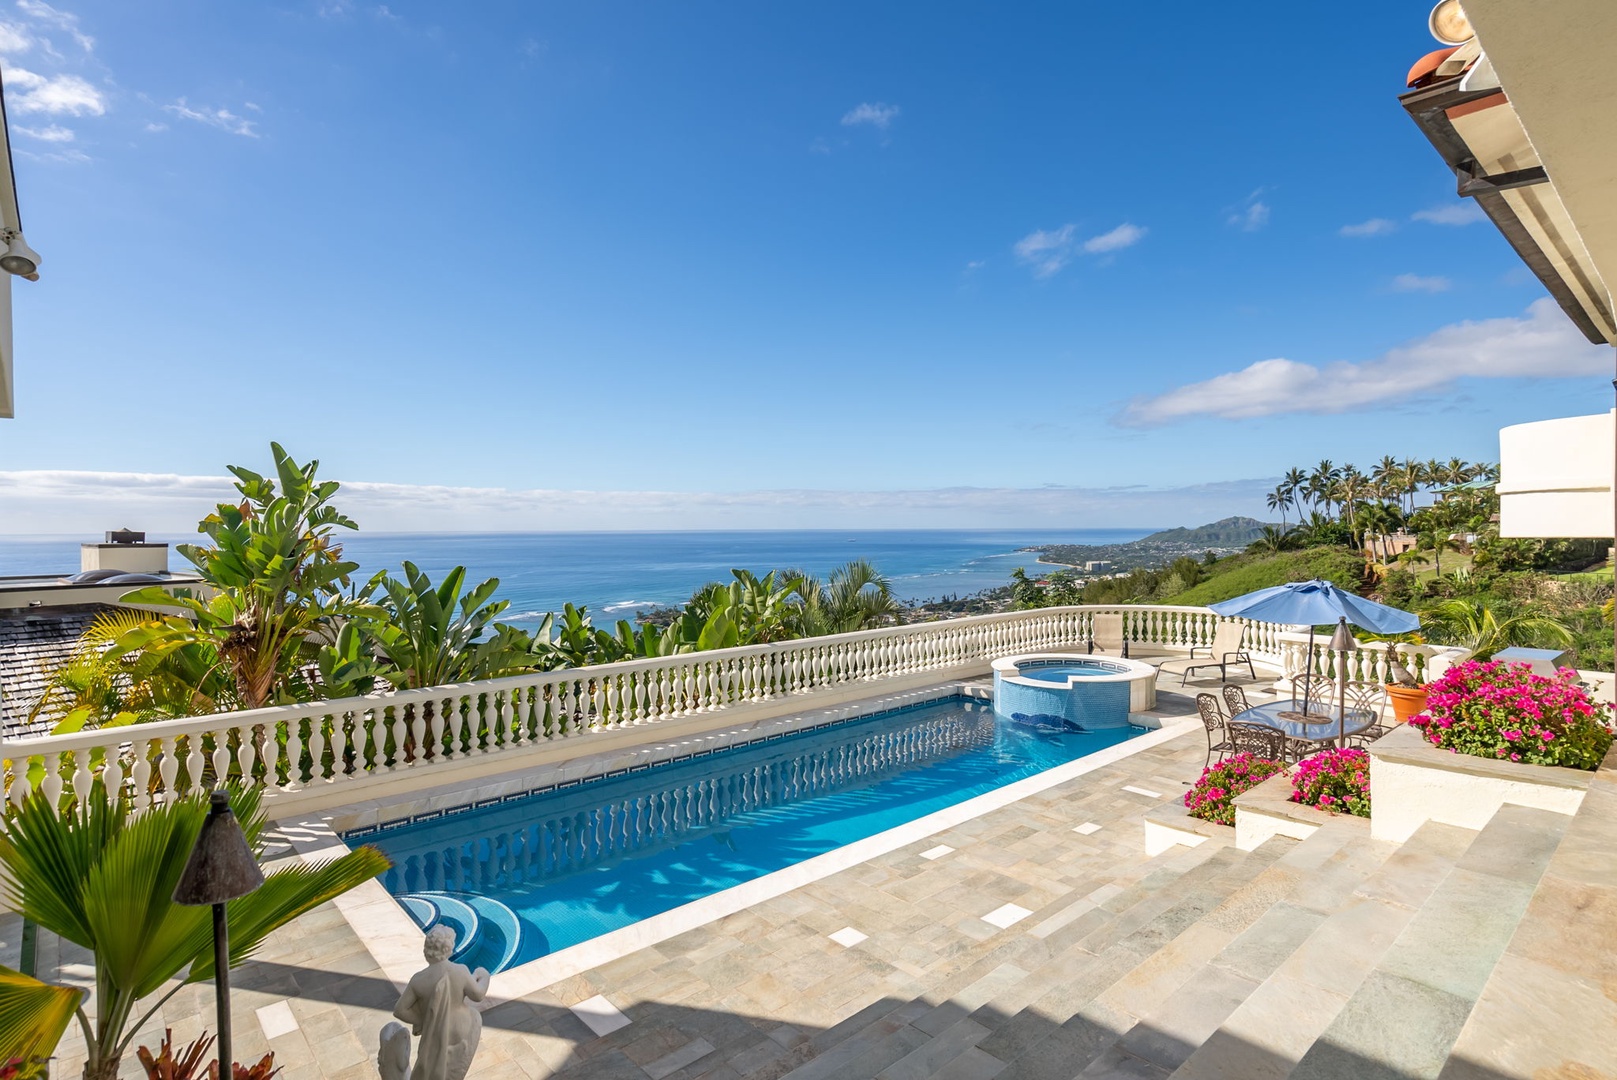 Honolulu Vacation Rentals, Hawaii Ridge Getaway - Take a dip into the pool to quench the island summer vibe.